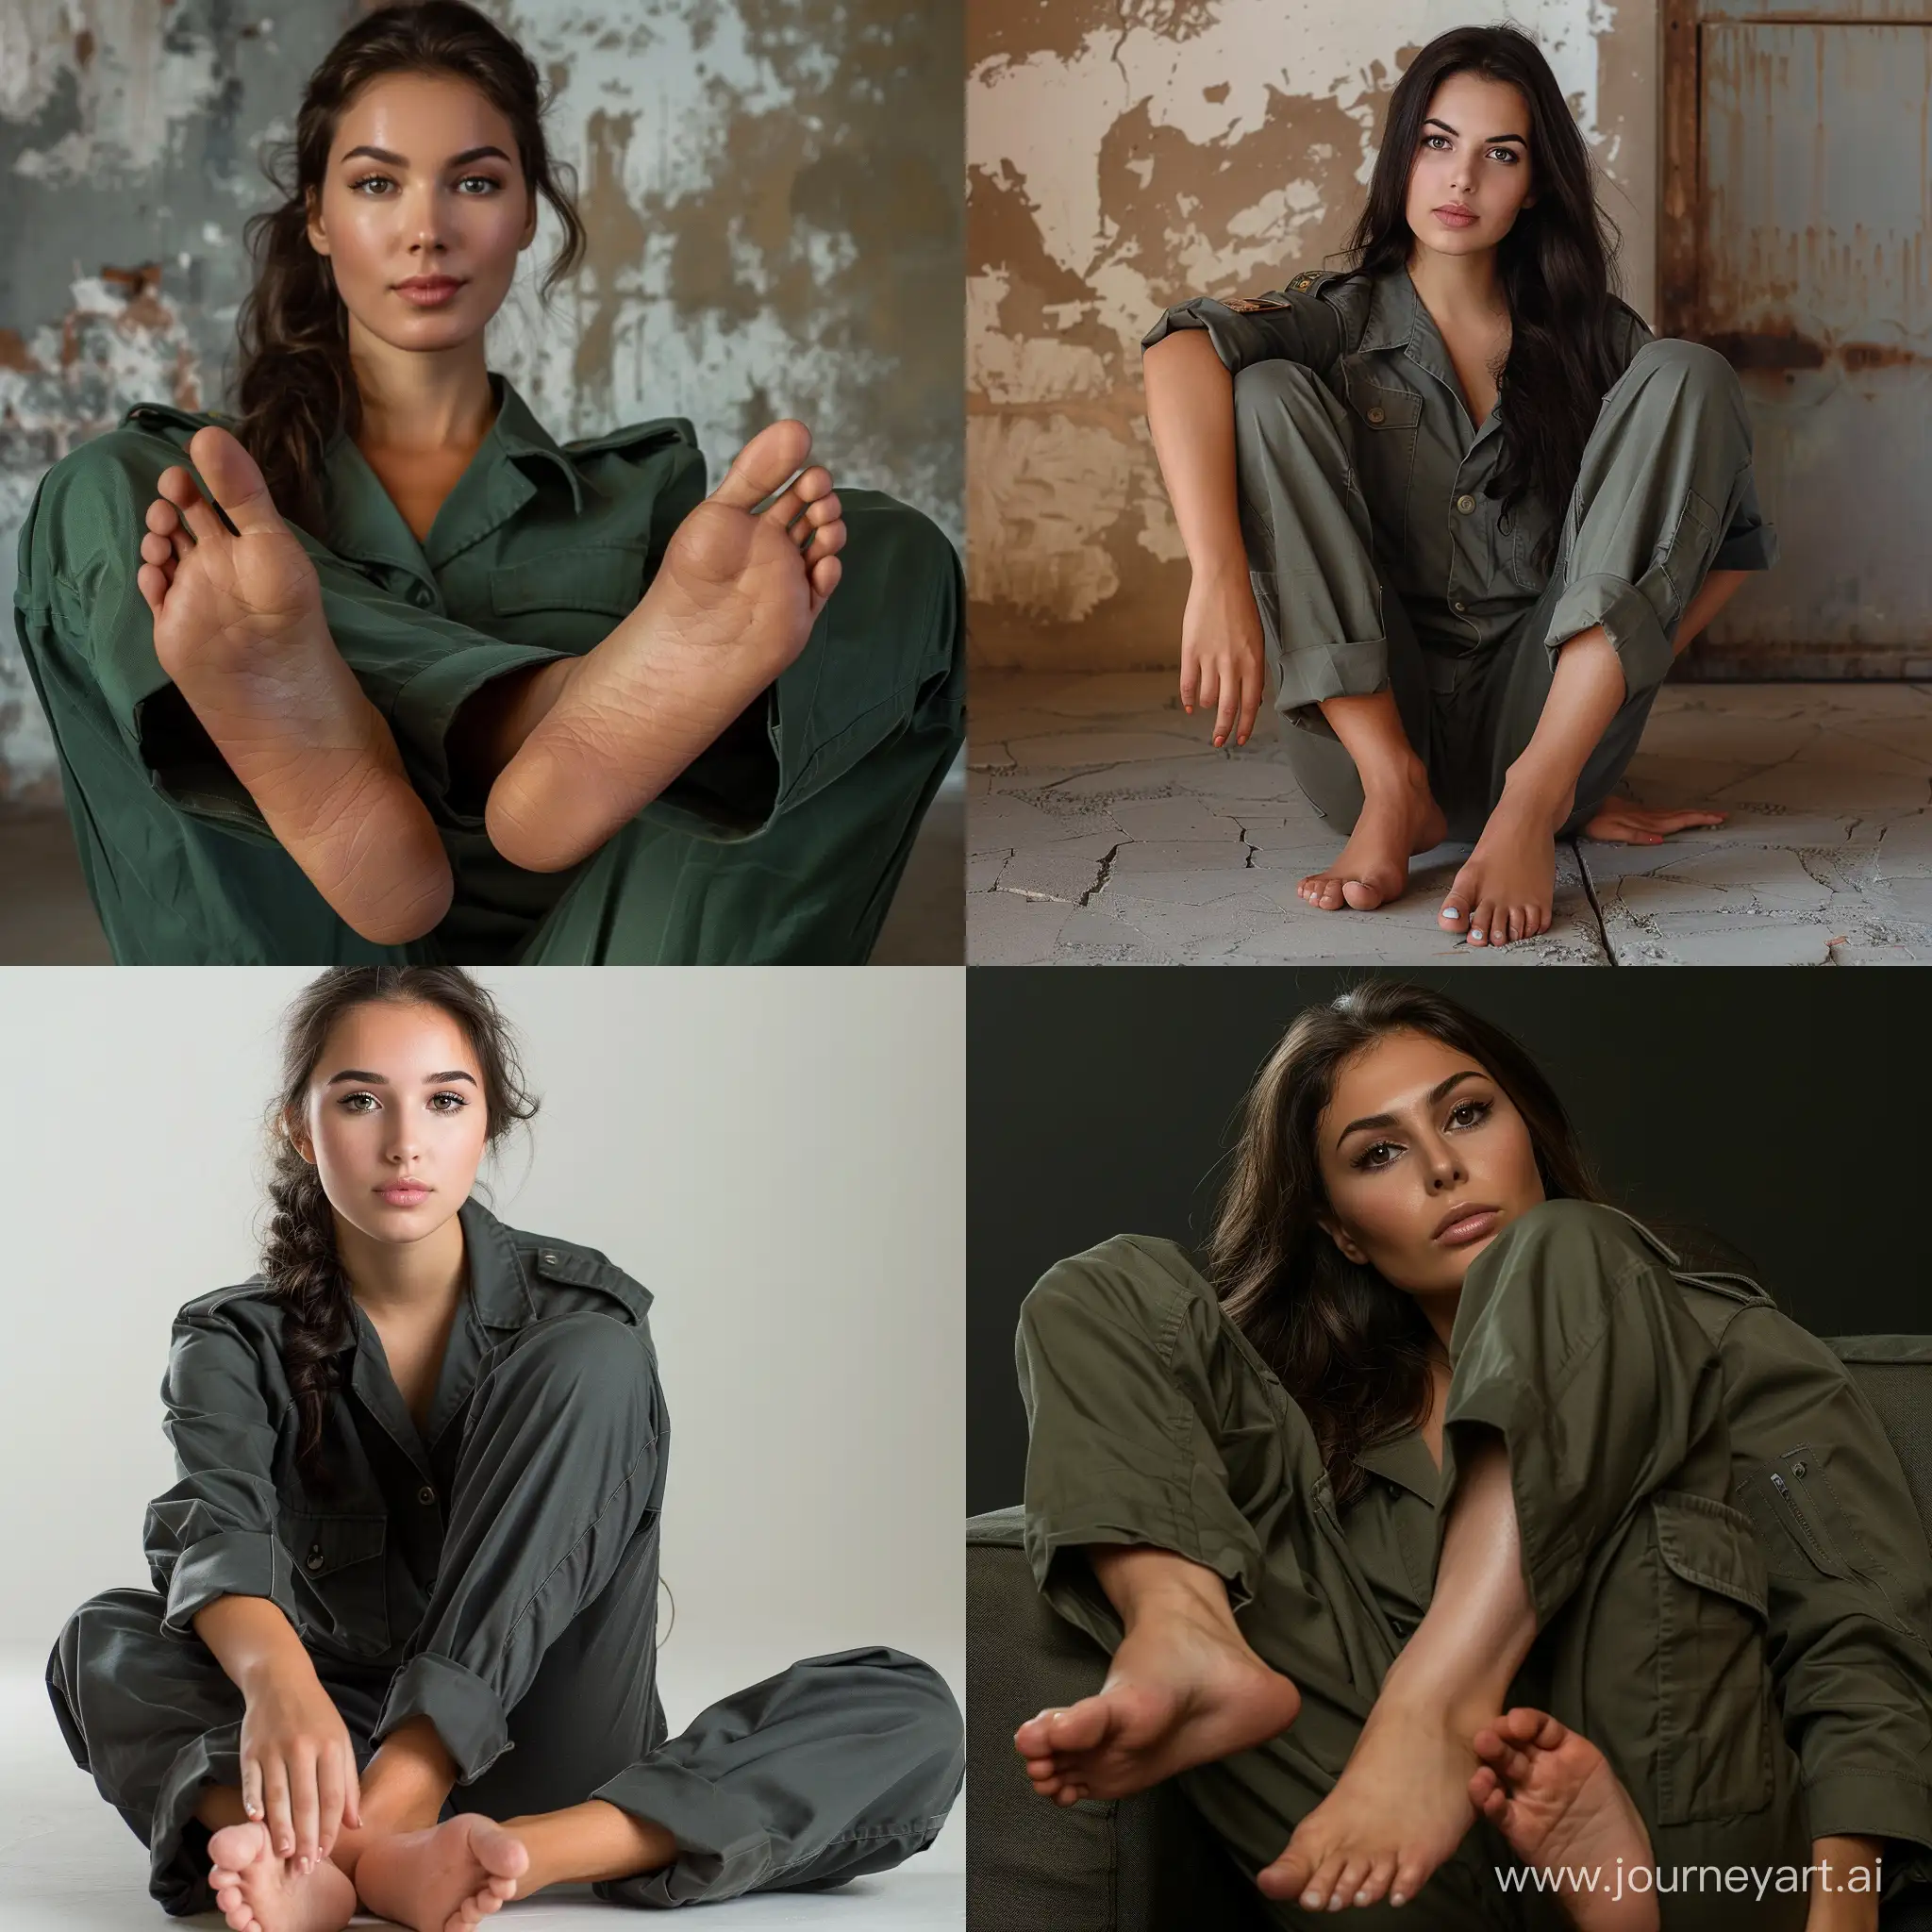 Realistic-Portrait-of-a-Beautiful-Brunette-Woman-in-Uniform-with-Bare-Feet-Soles